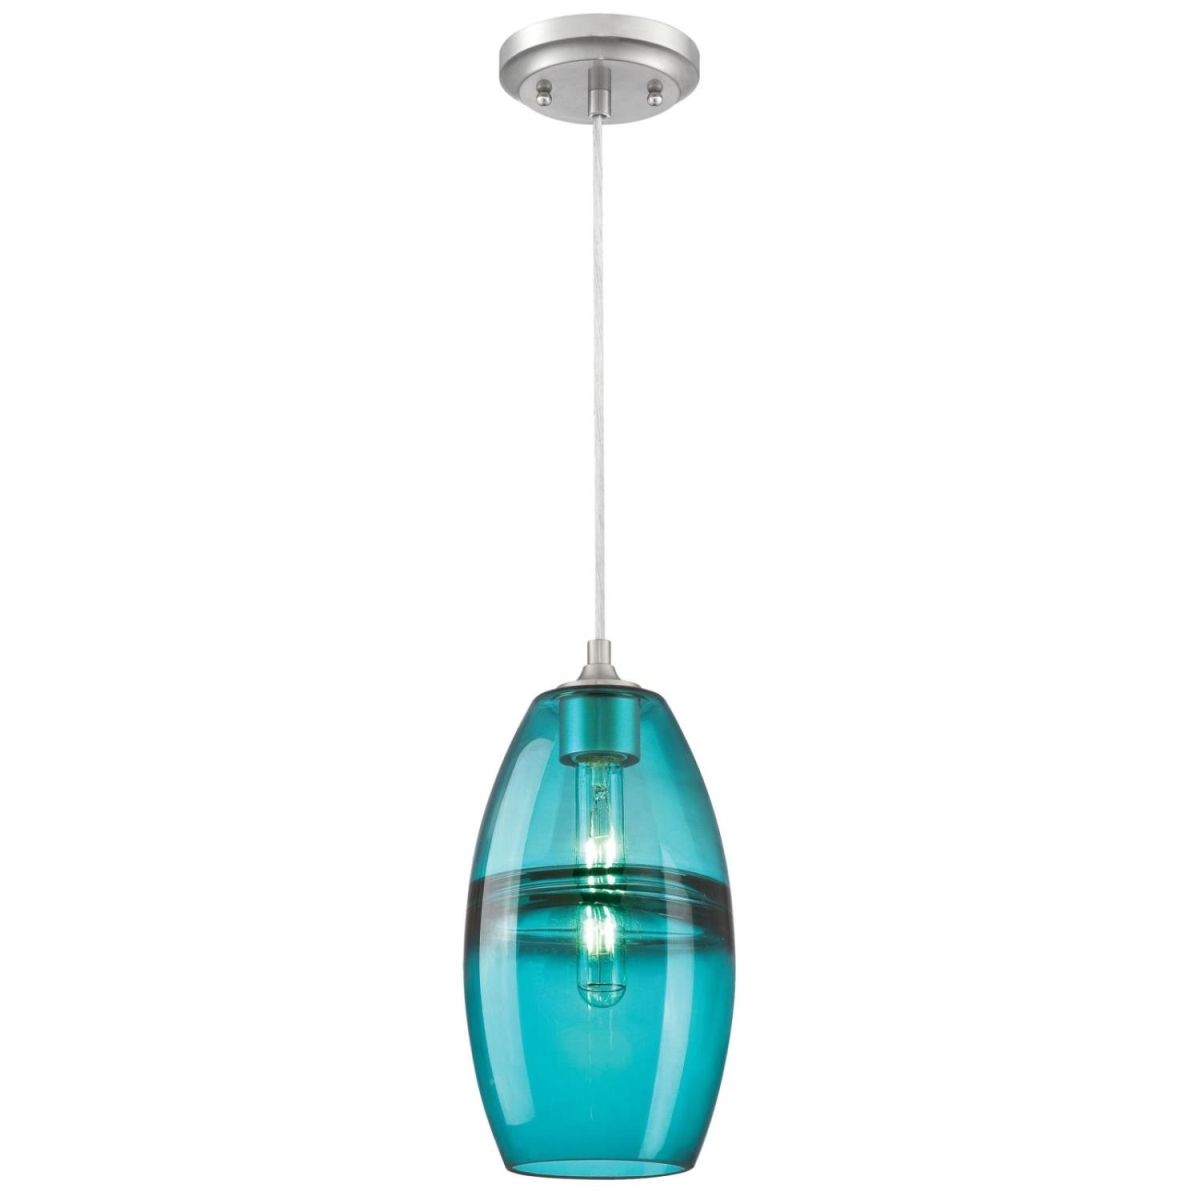 Picture of Westinghouse Lighting 6366300 Mini Pendant with Turquoise Glass - Brushed Nickel